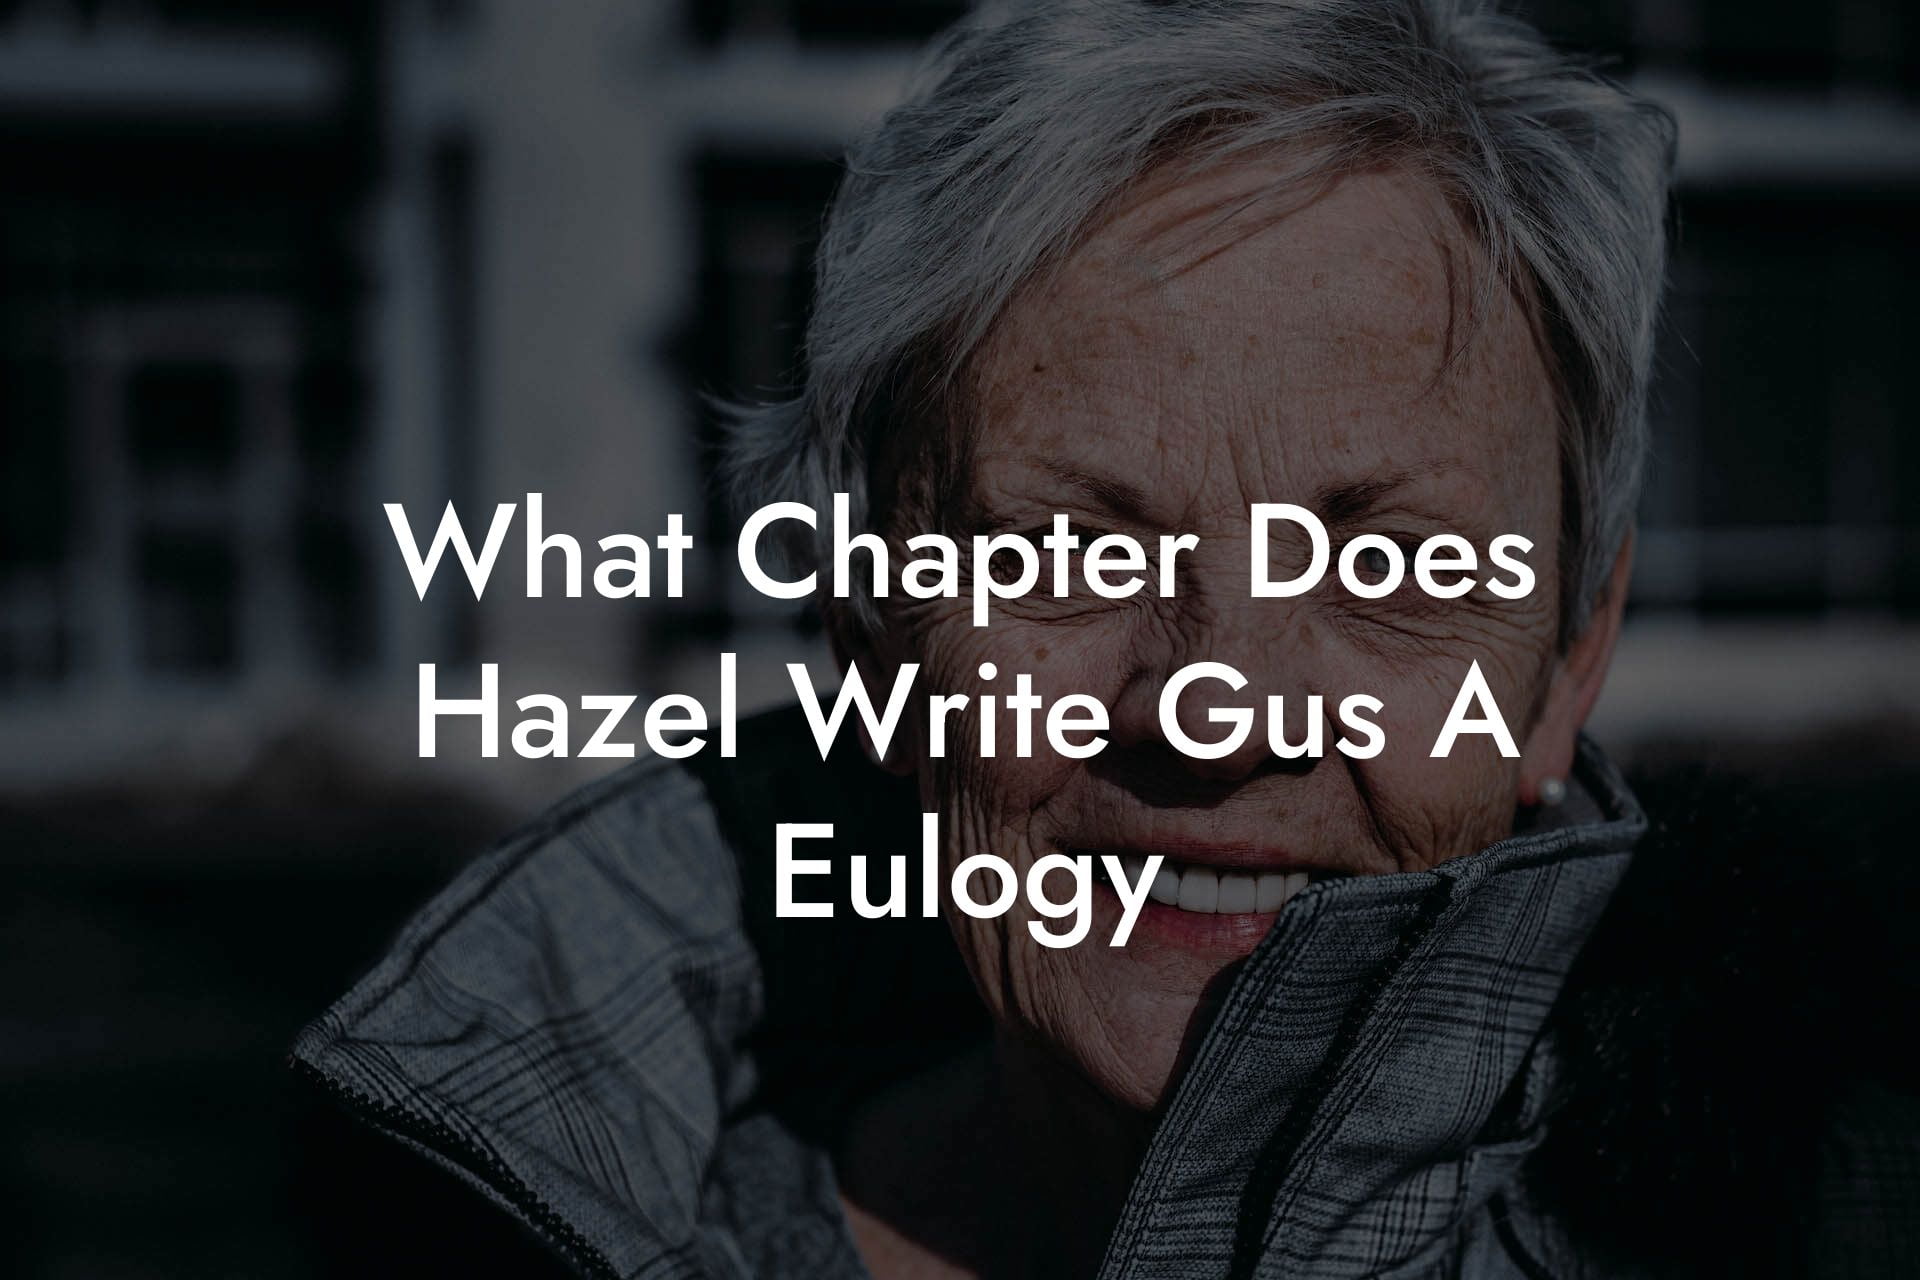 What Chapter Does Hazel Write Gus A Eulogy